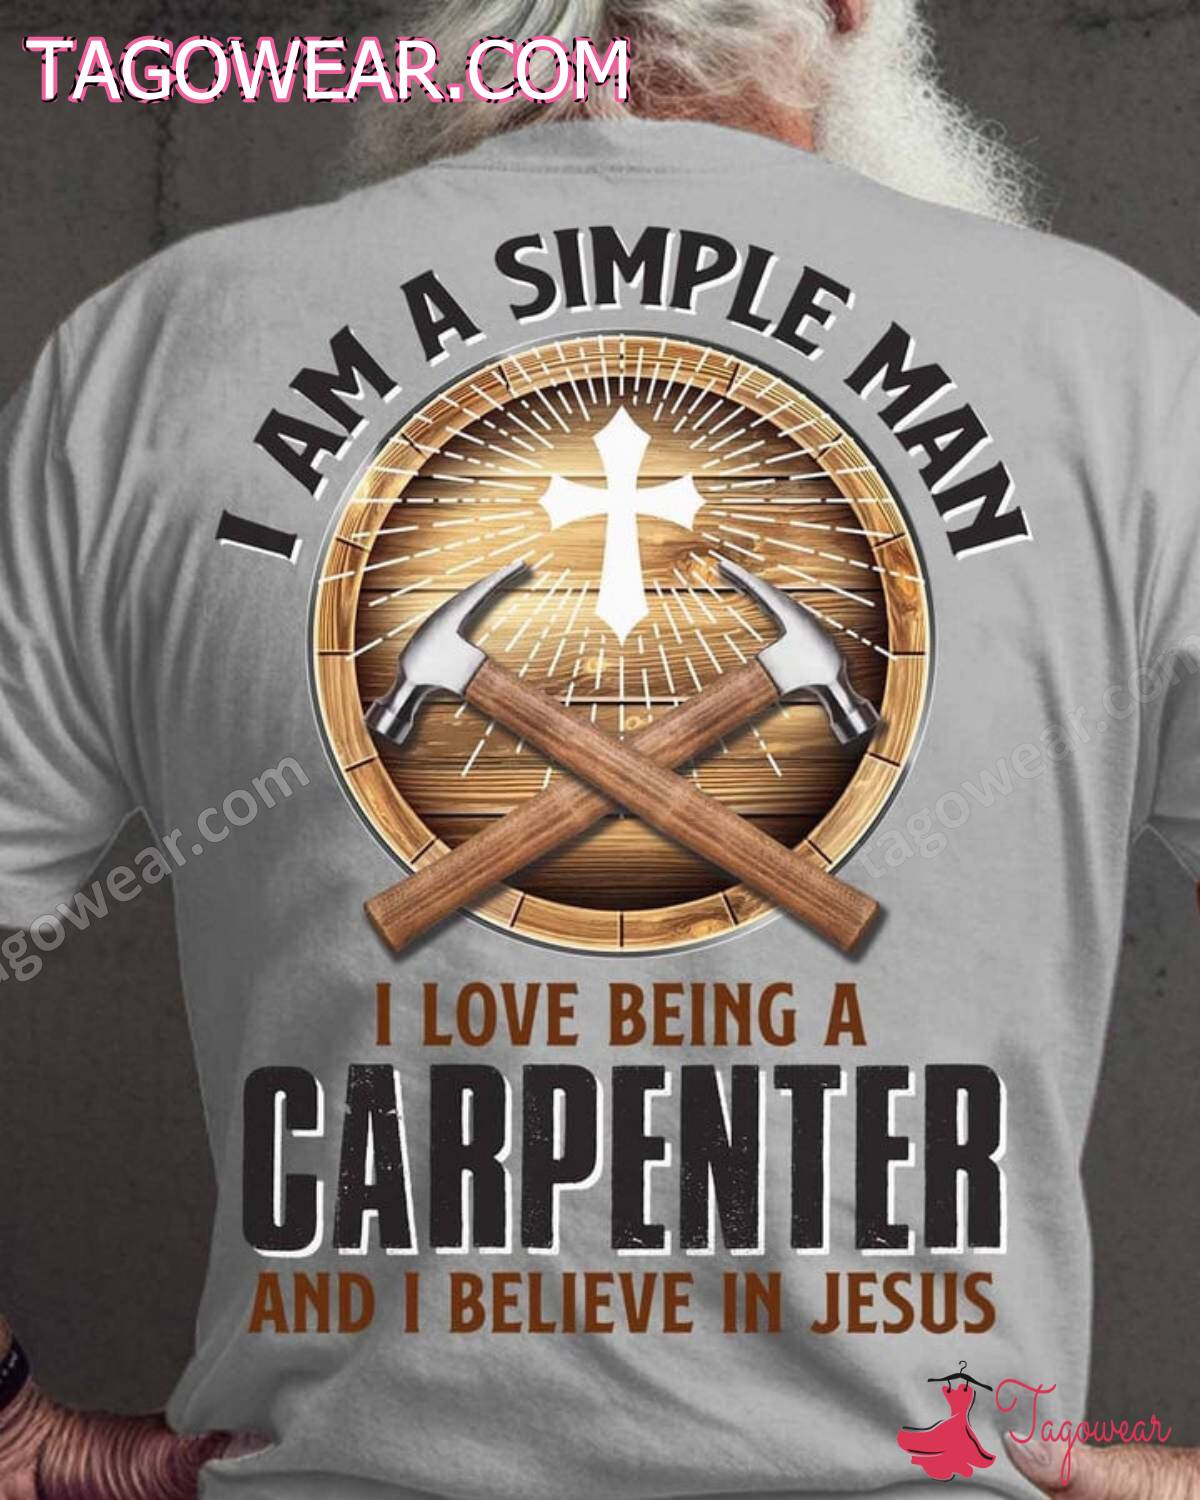 I Am A Simple Man I Love Being A Carpenter And I Believe In Jesus Shirt